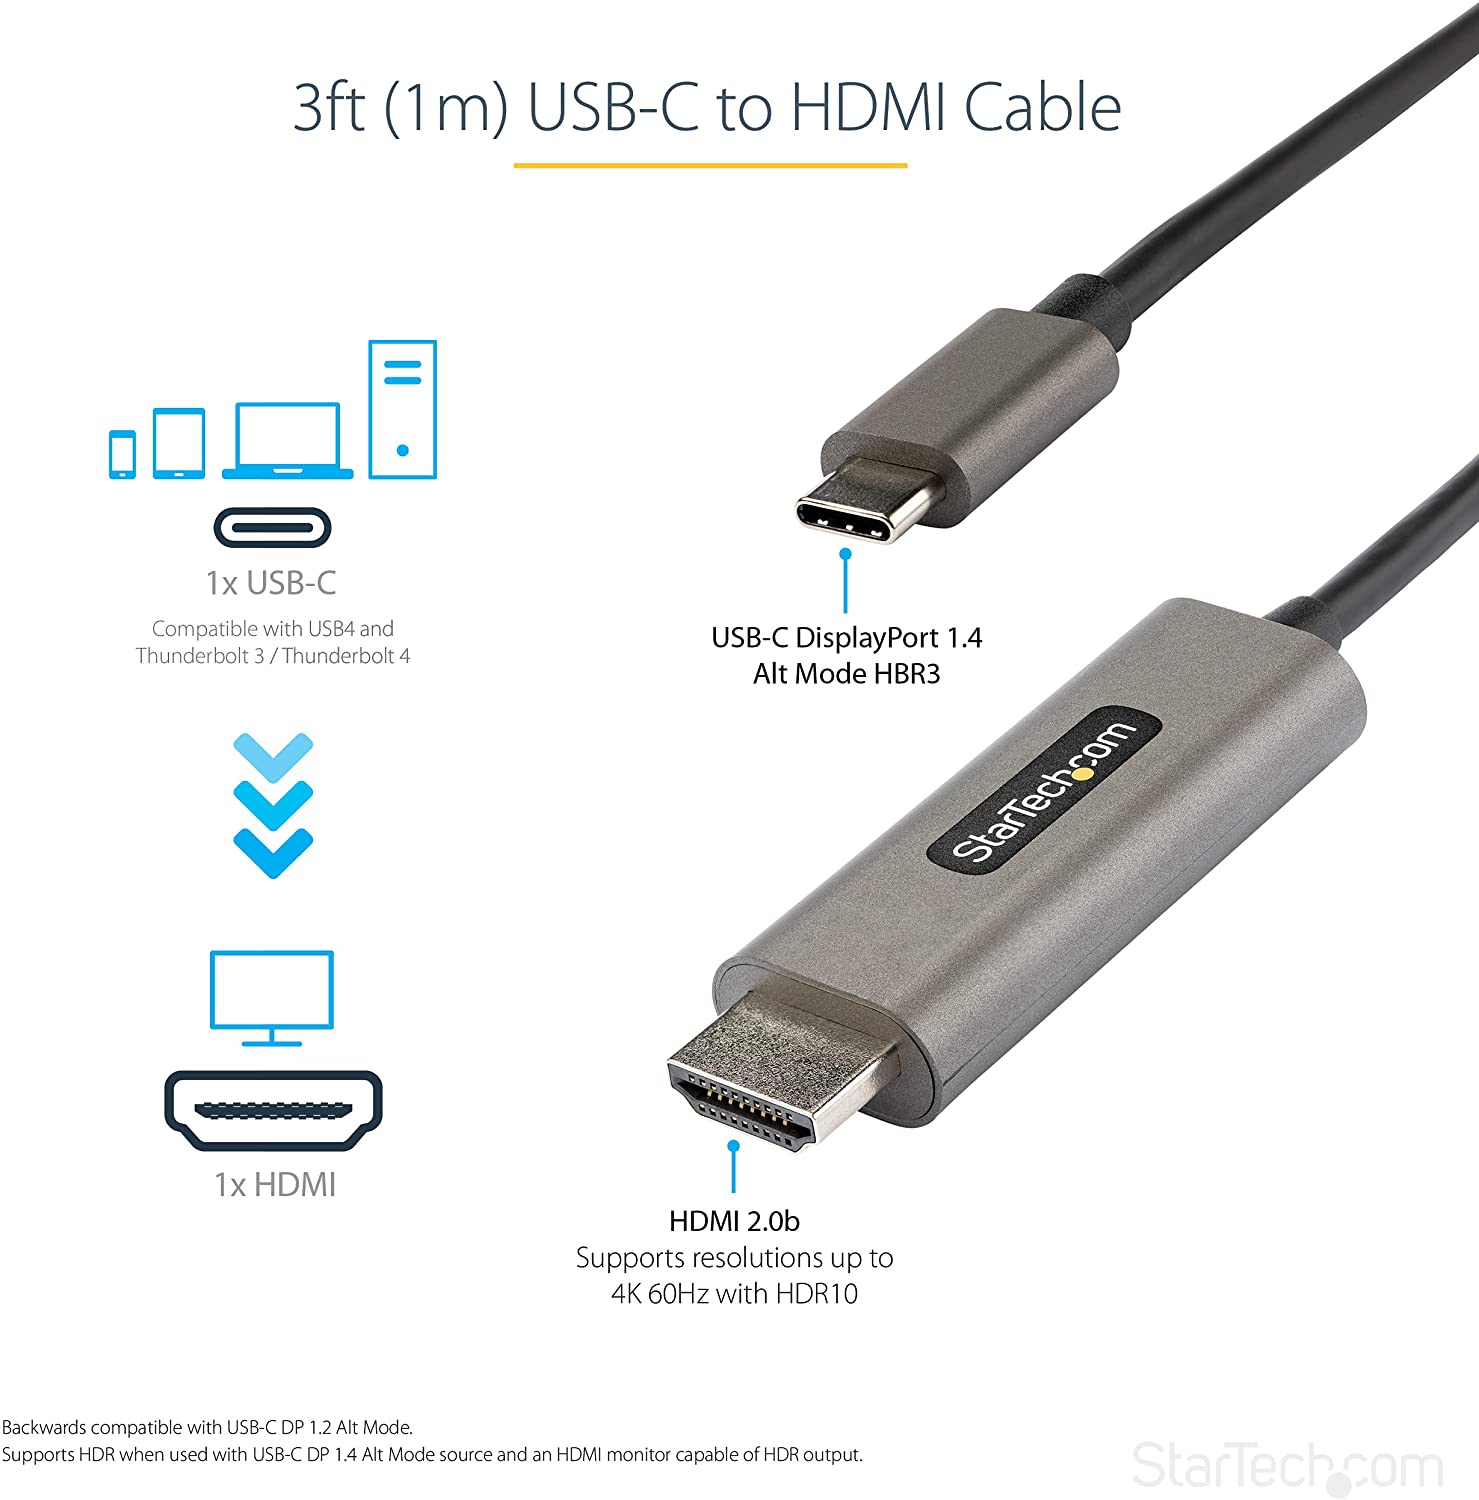 StarTech.com 3ft (1m) USB C to HDMI Cable 4K 60Hz w/ HDR10